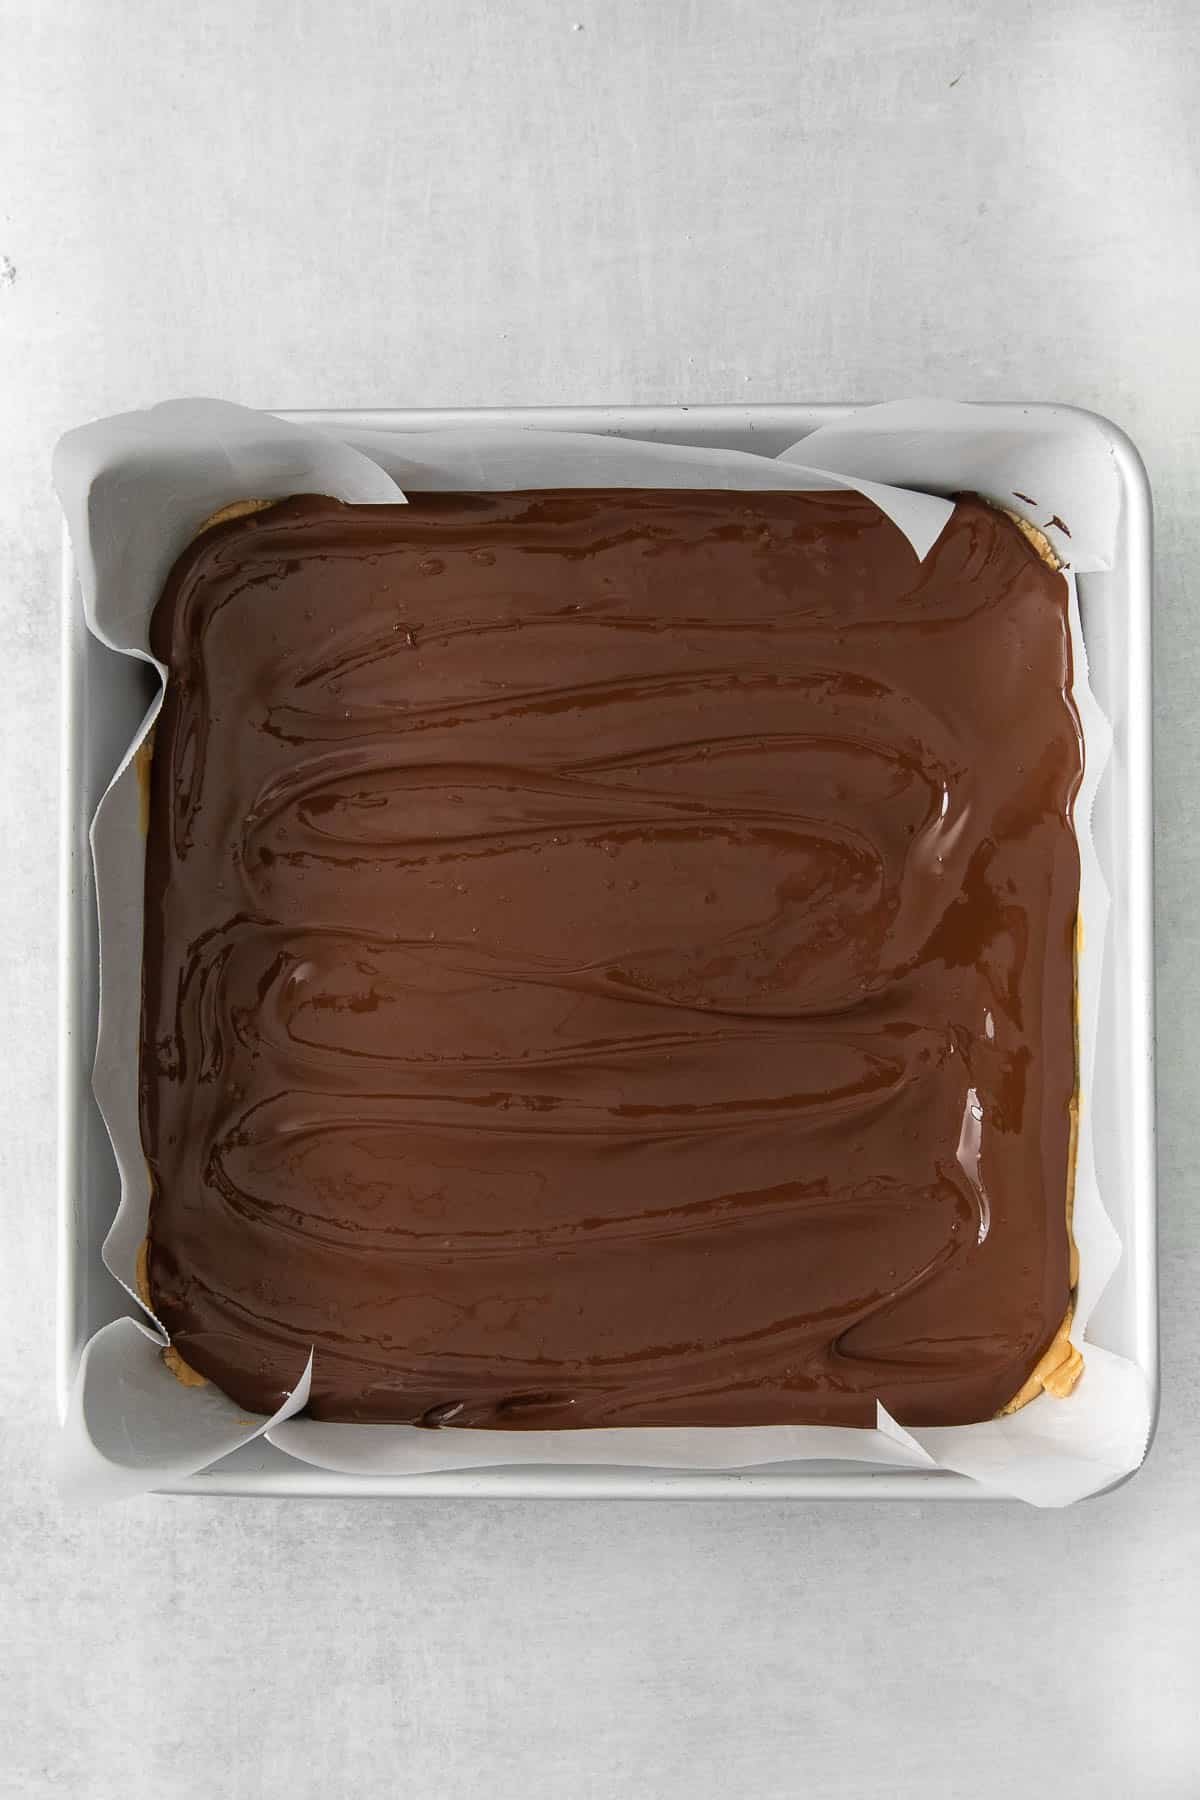 melted chocolate spread in a square metal baking dish.